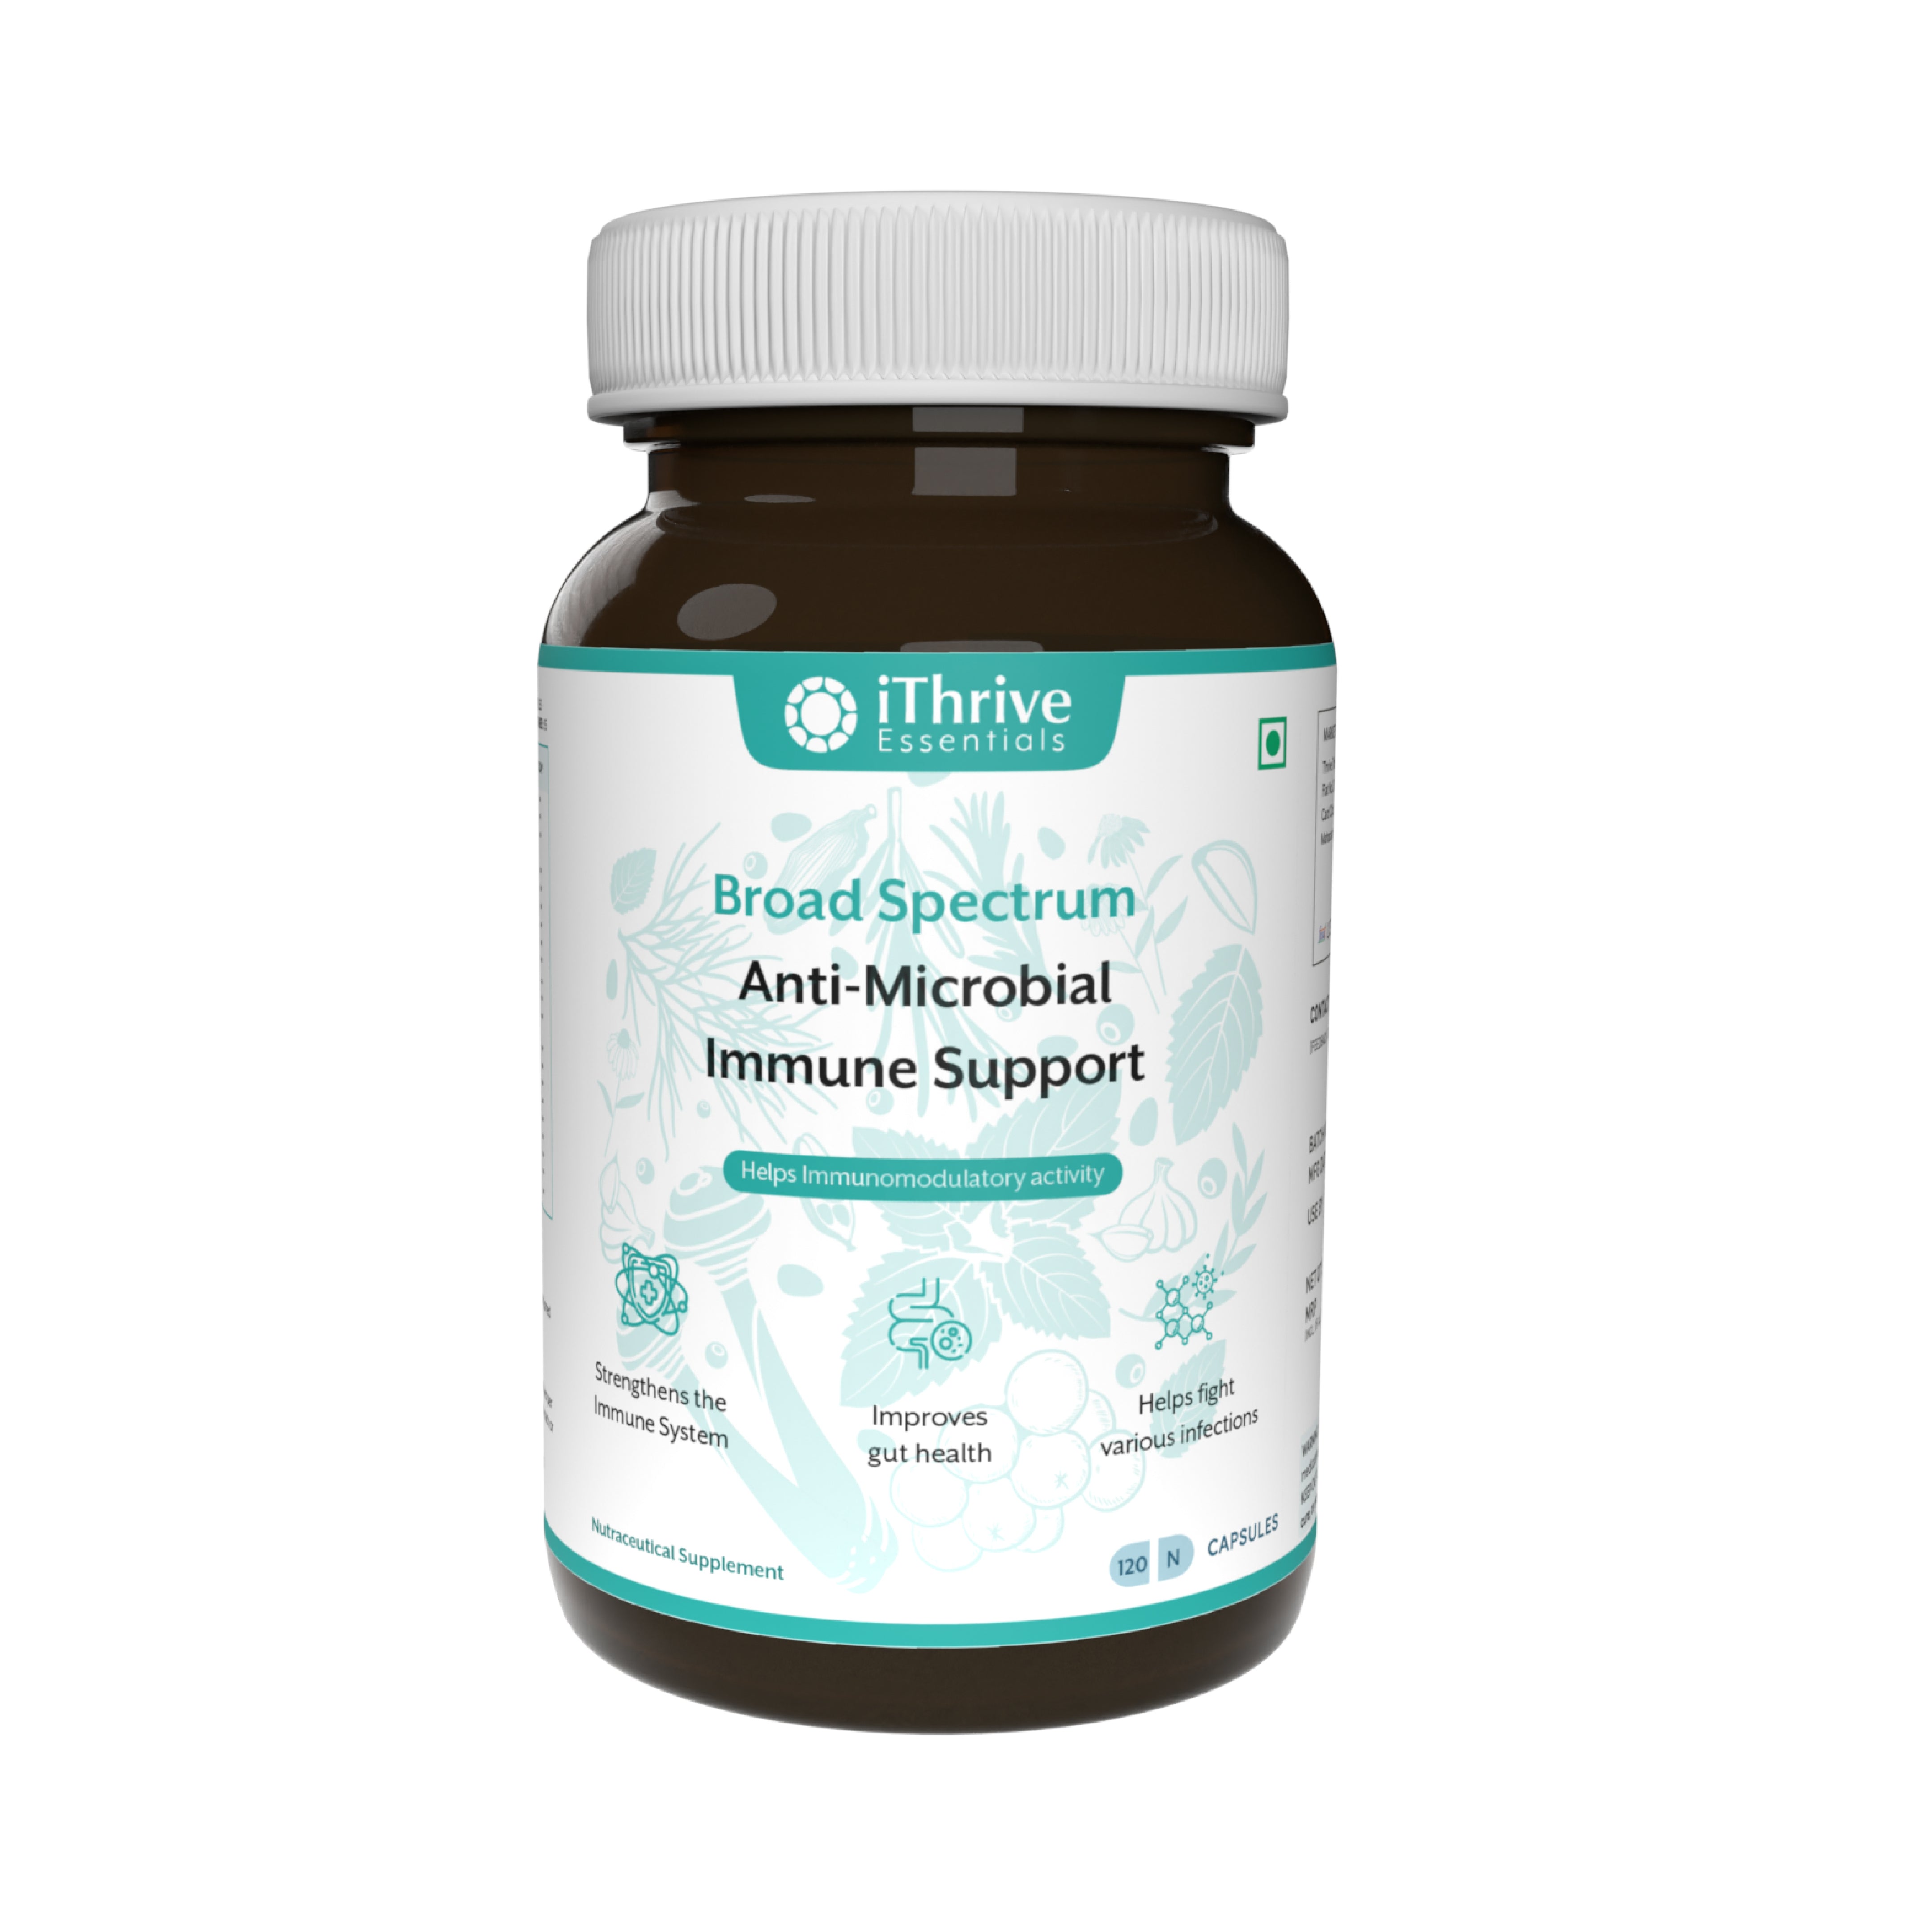 glass bottle of ithrive essentials natural immune support supplement